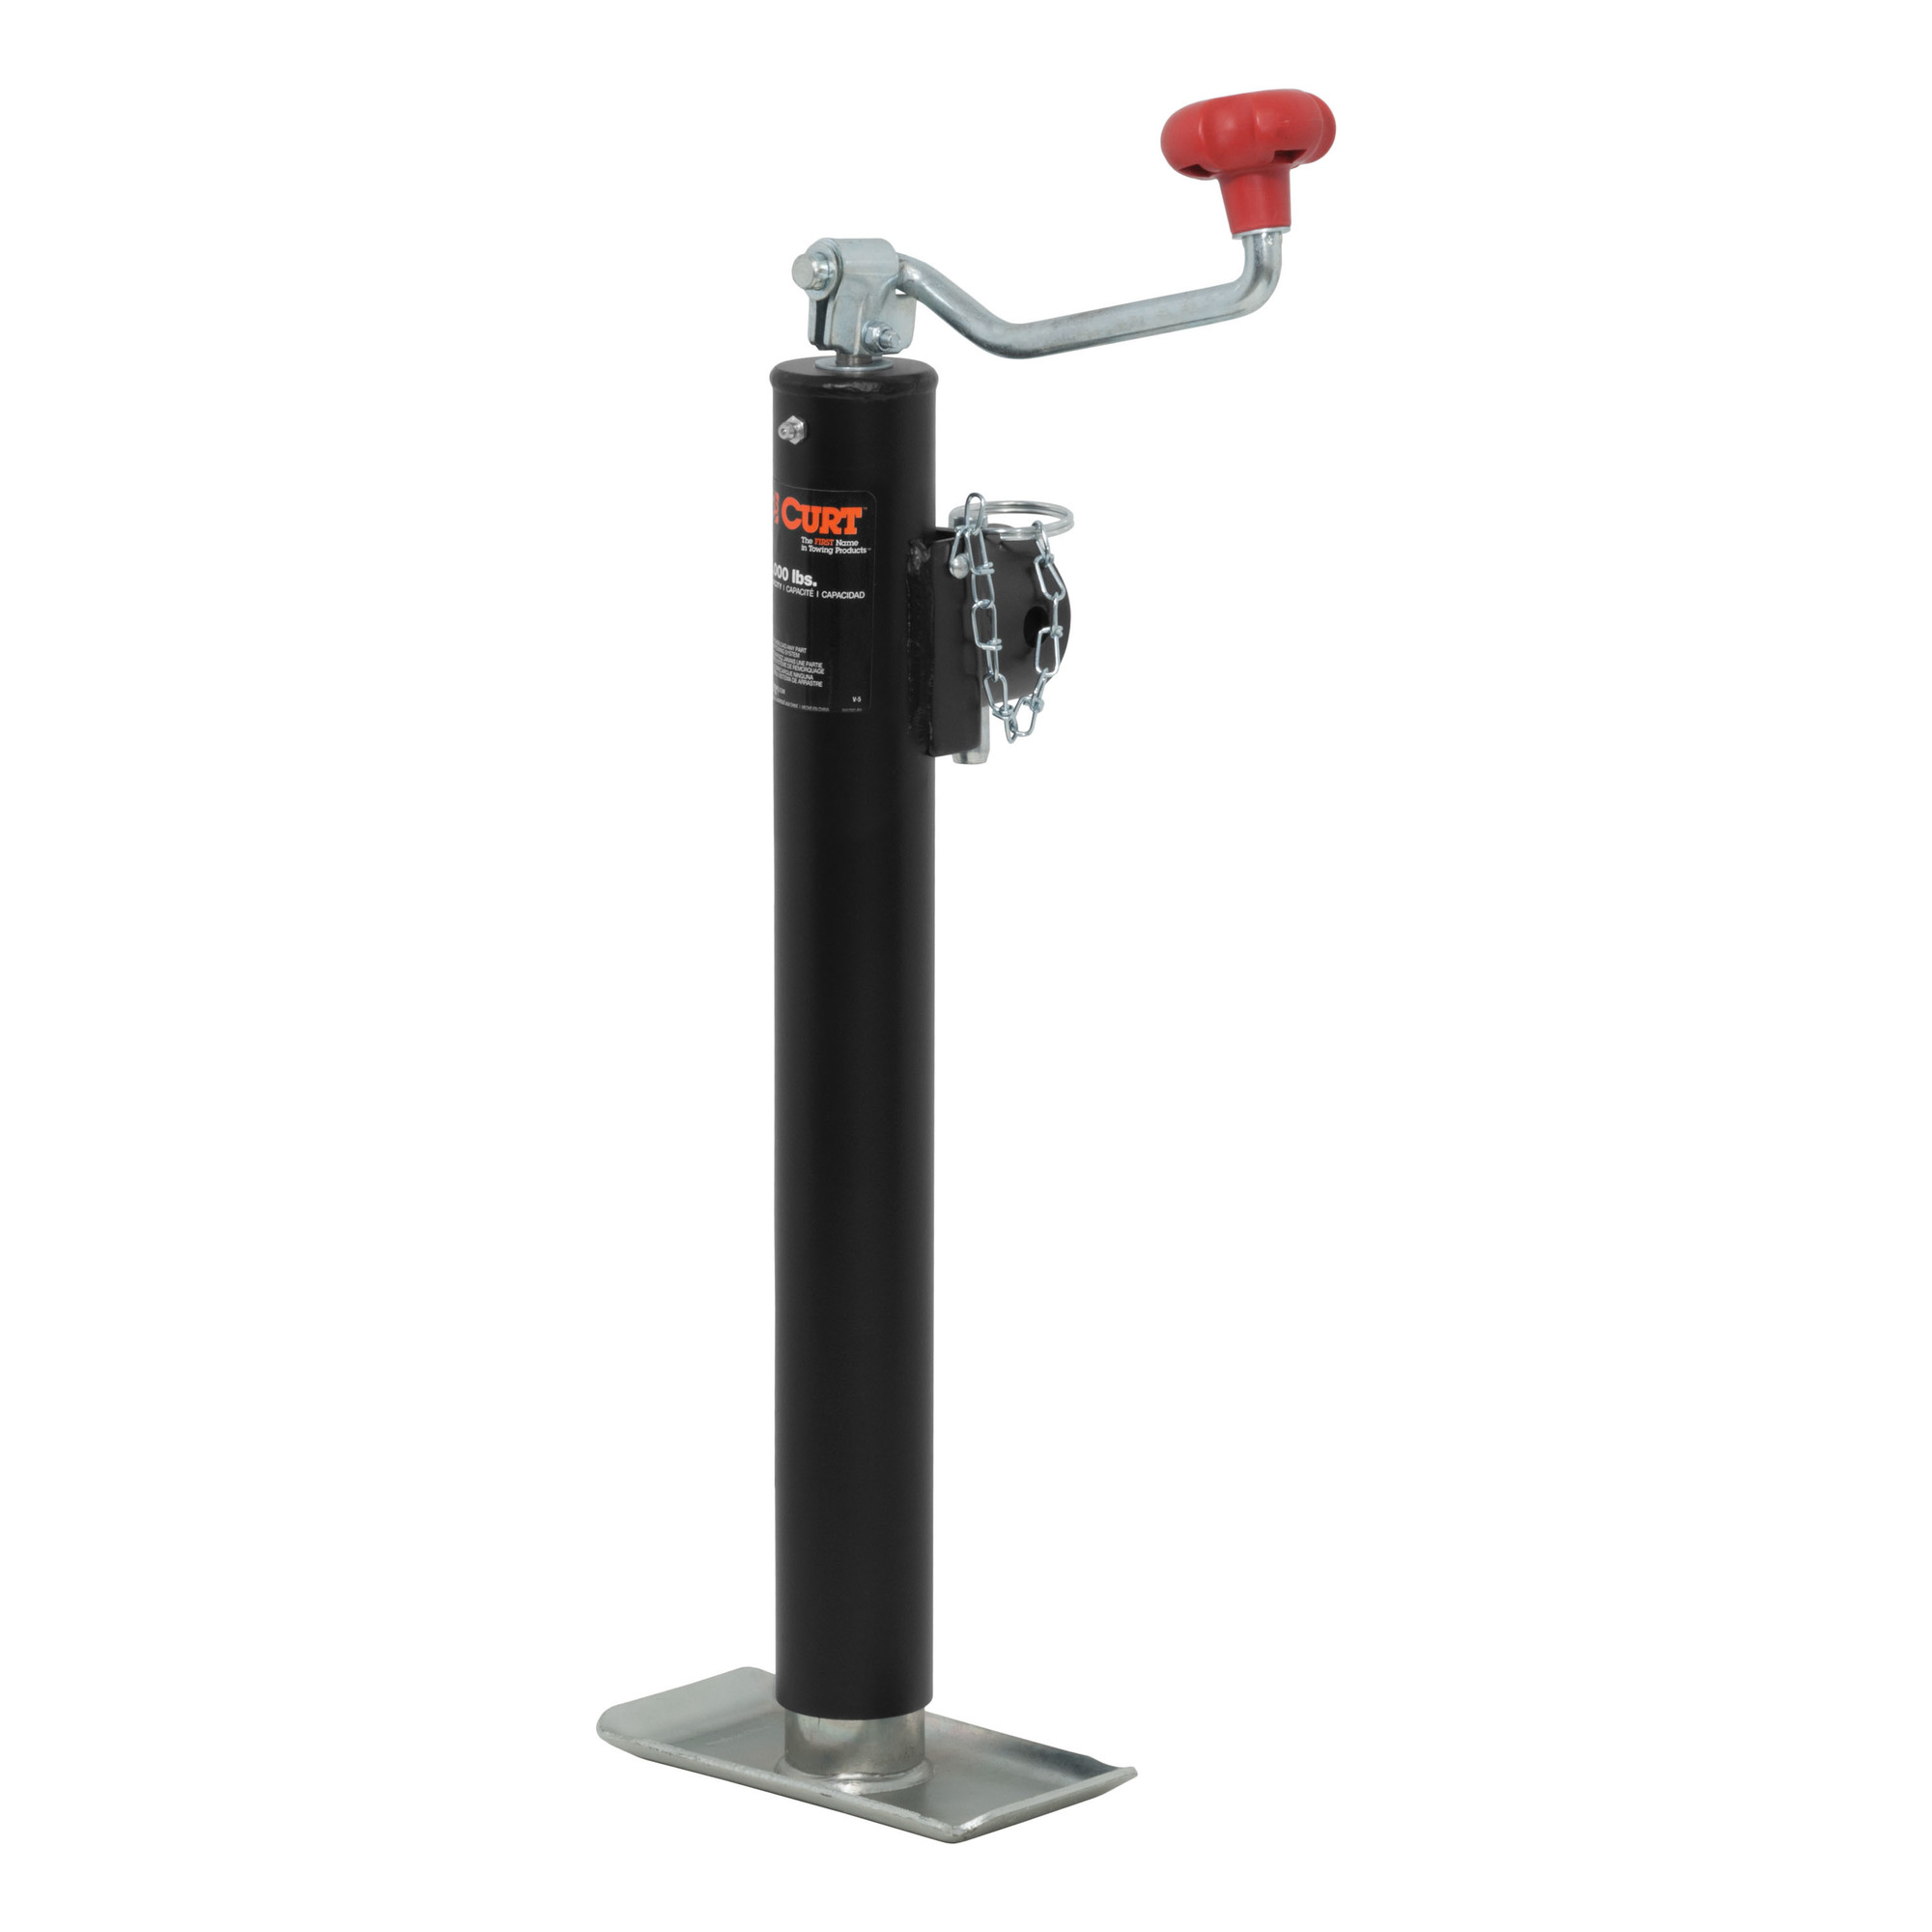 Curt Manufacturing, Pipe-Mnt Jack w Top Handle 2 000 lbs 15Inch Travel, Lift Capacity 2000 lb, Jack Type Topwind, Mount Type Weld-On, Model 28322